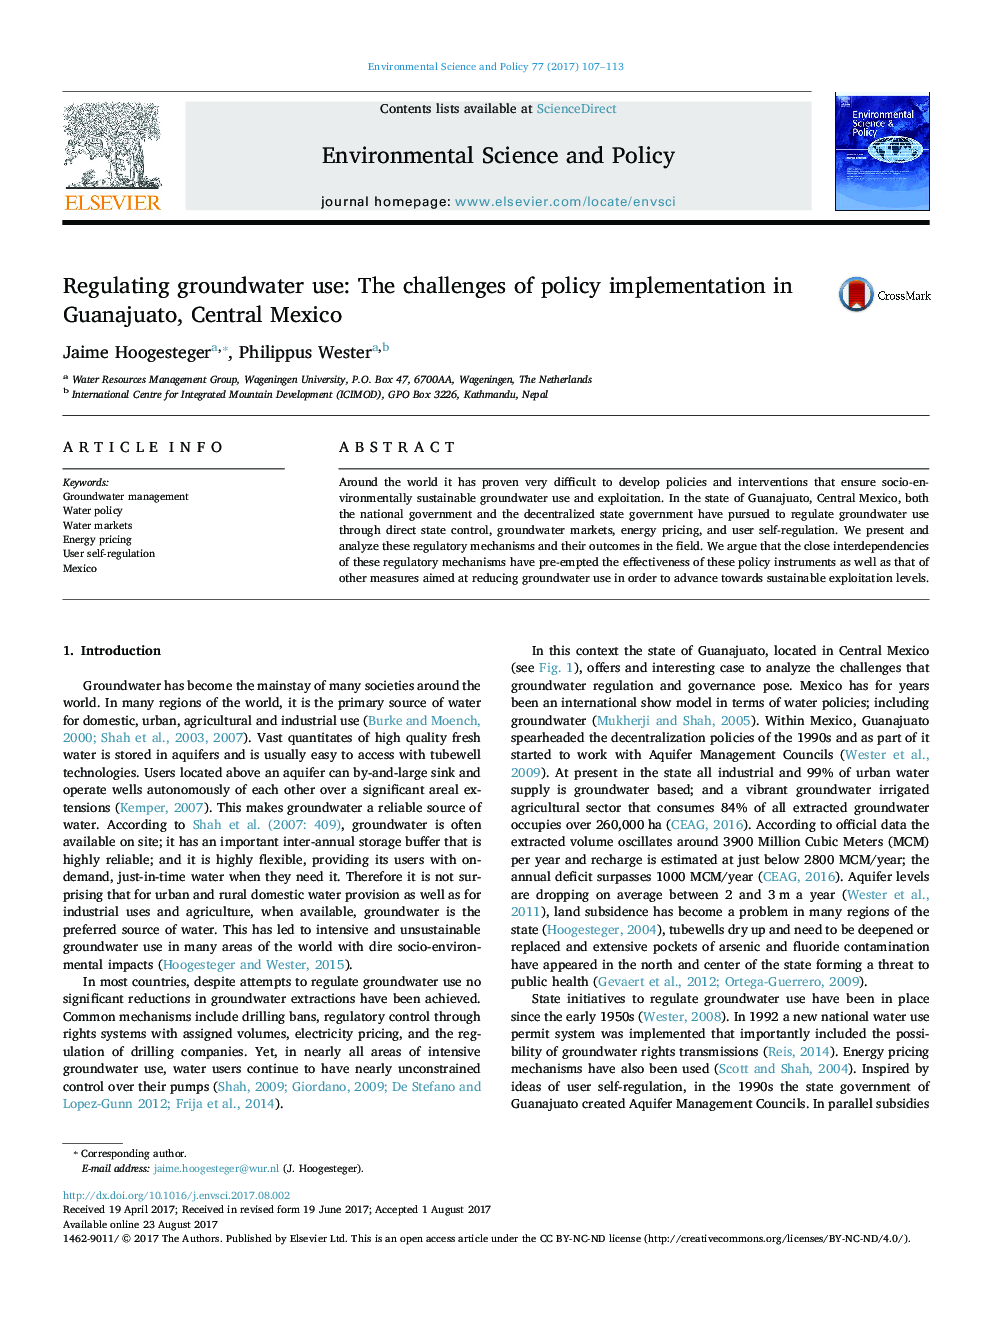 Regulating groundwater use: The challenges of policy implementation in Guanajuato, Central Mexico